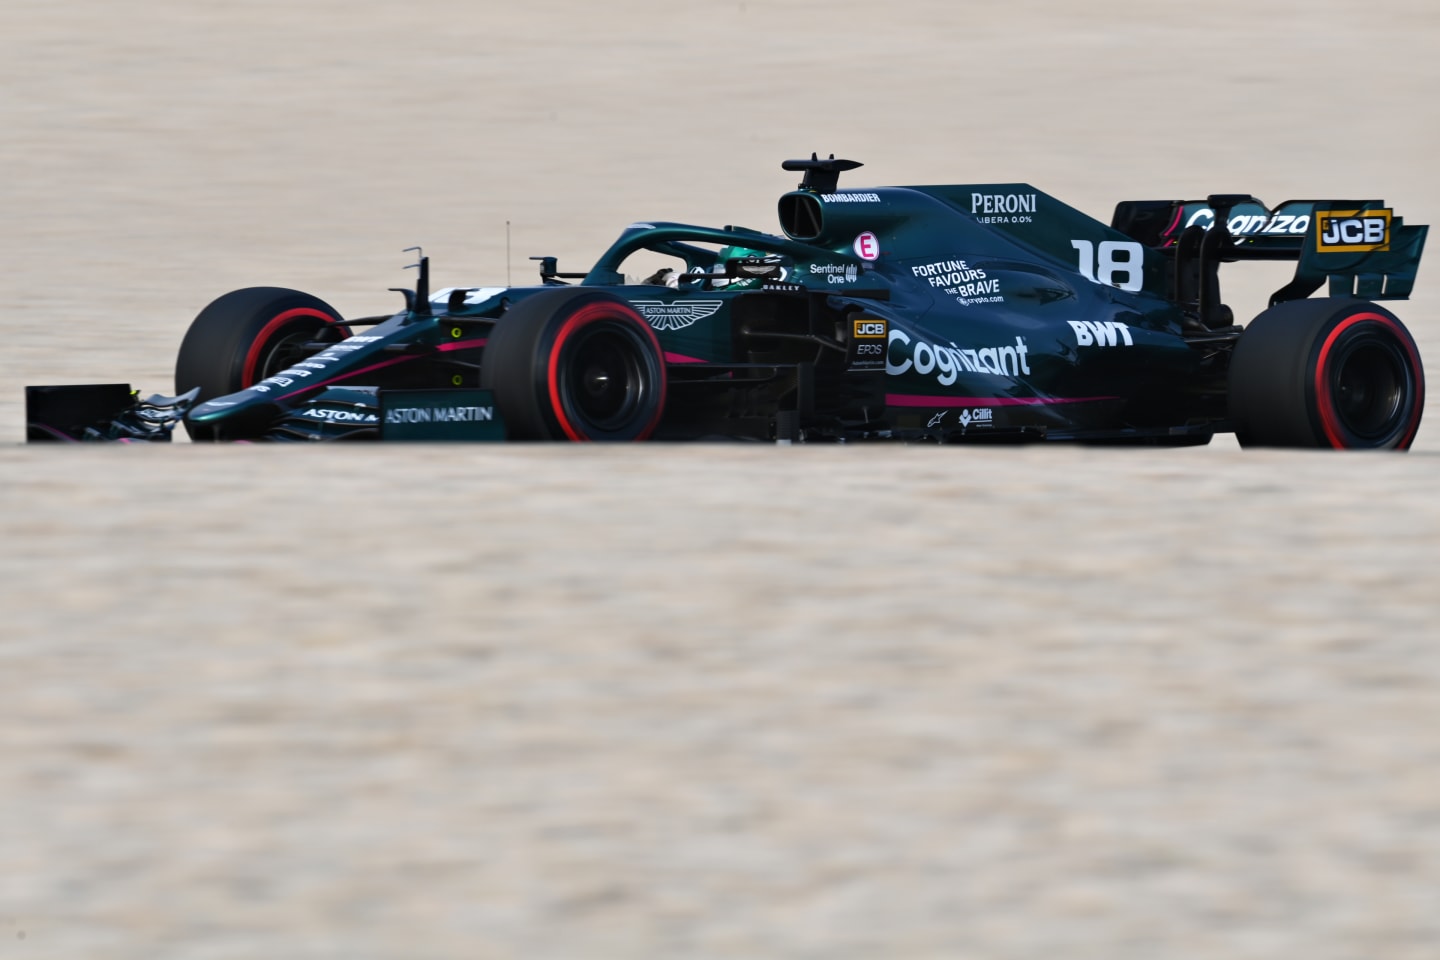 DOHA, QATAR - NOVEMBER 20: Lance Stroll of Canada driving the (18) Aston Martin AMR21 Mercedes during final practice ahead of the F1 Grand Prix of Qatar at Losail International Circuit on November 20, 2021 in Doha, Qatar. (Photo by Clive Mason/Getty Images)